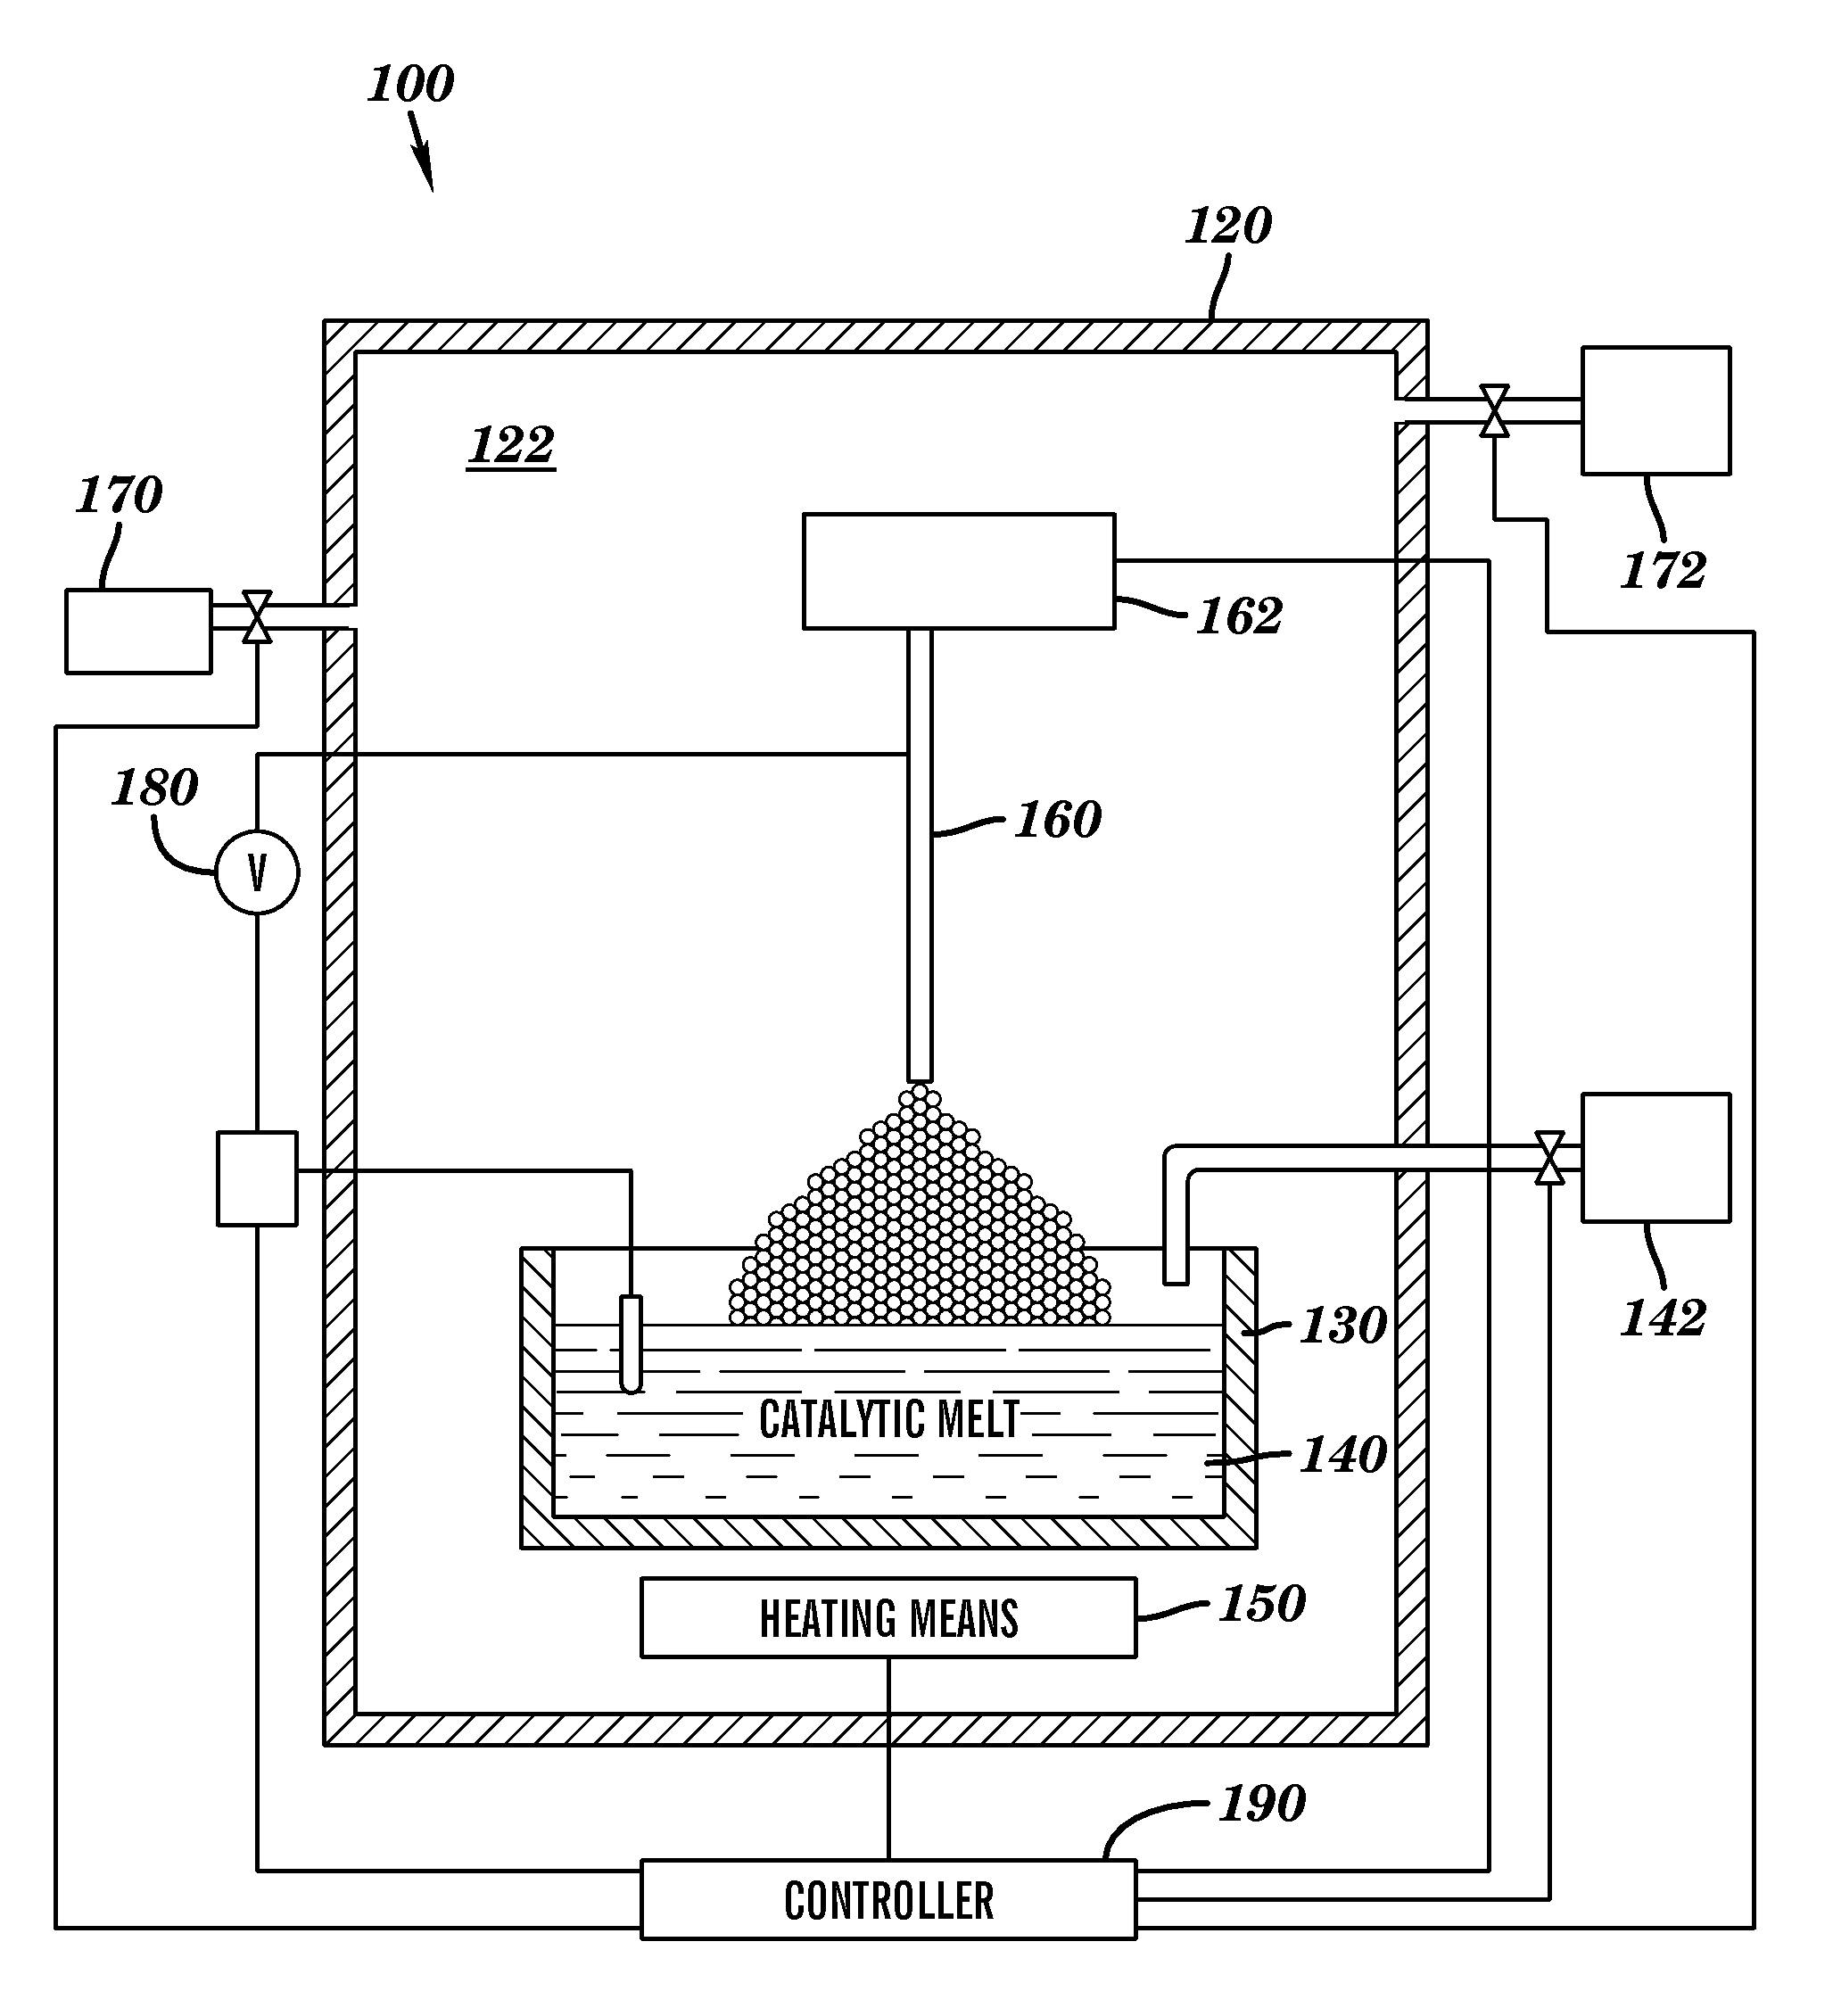 Apparatus and methods for continuously growing carbon nanotubes and graphene sheets